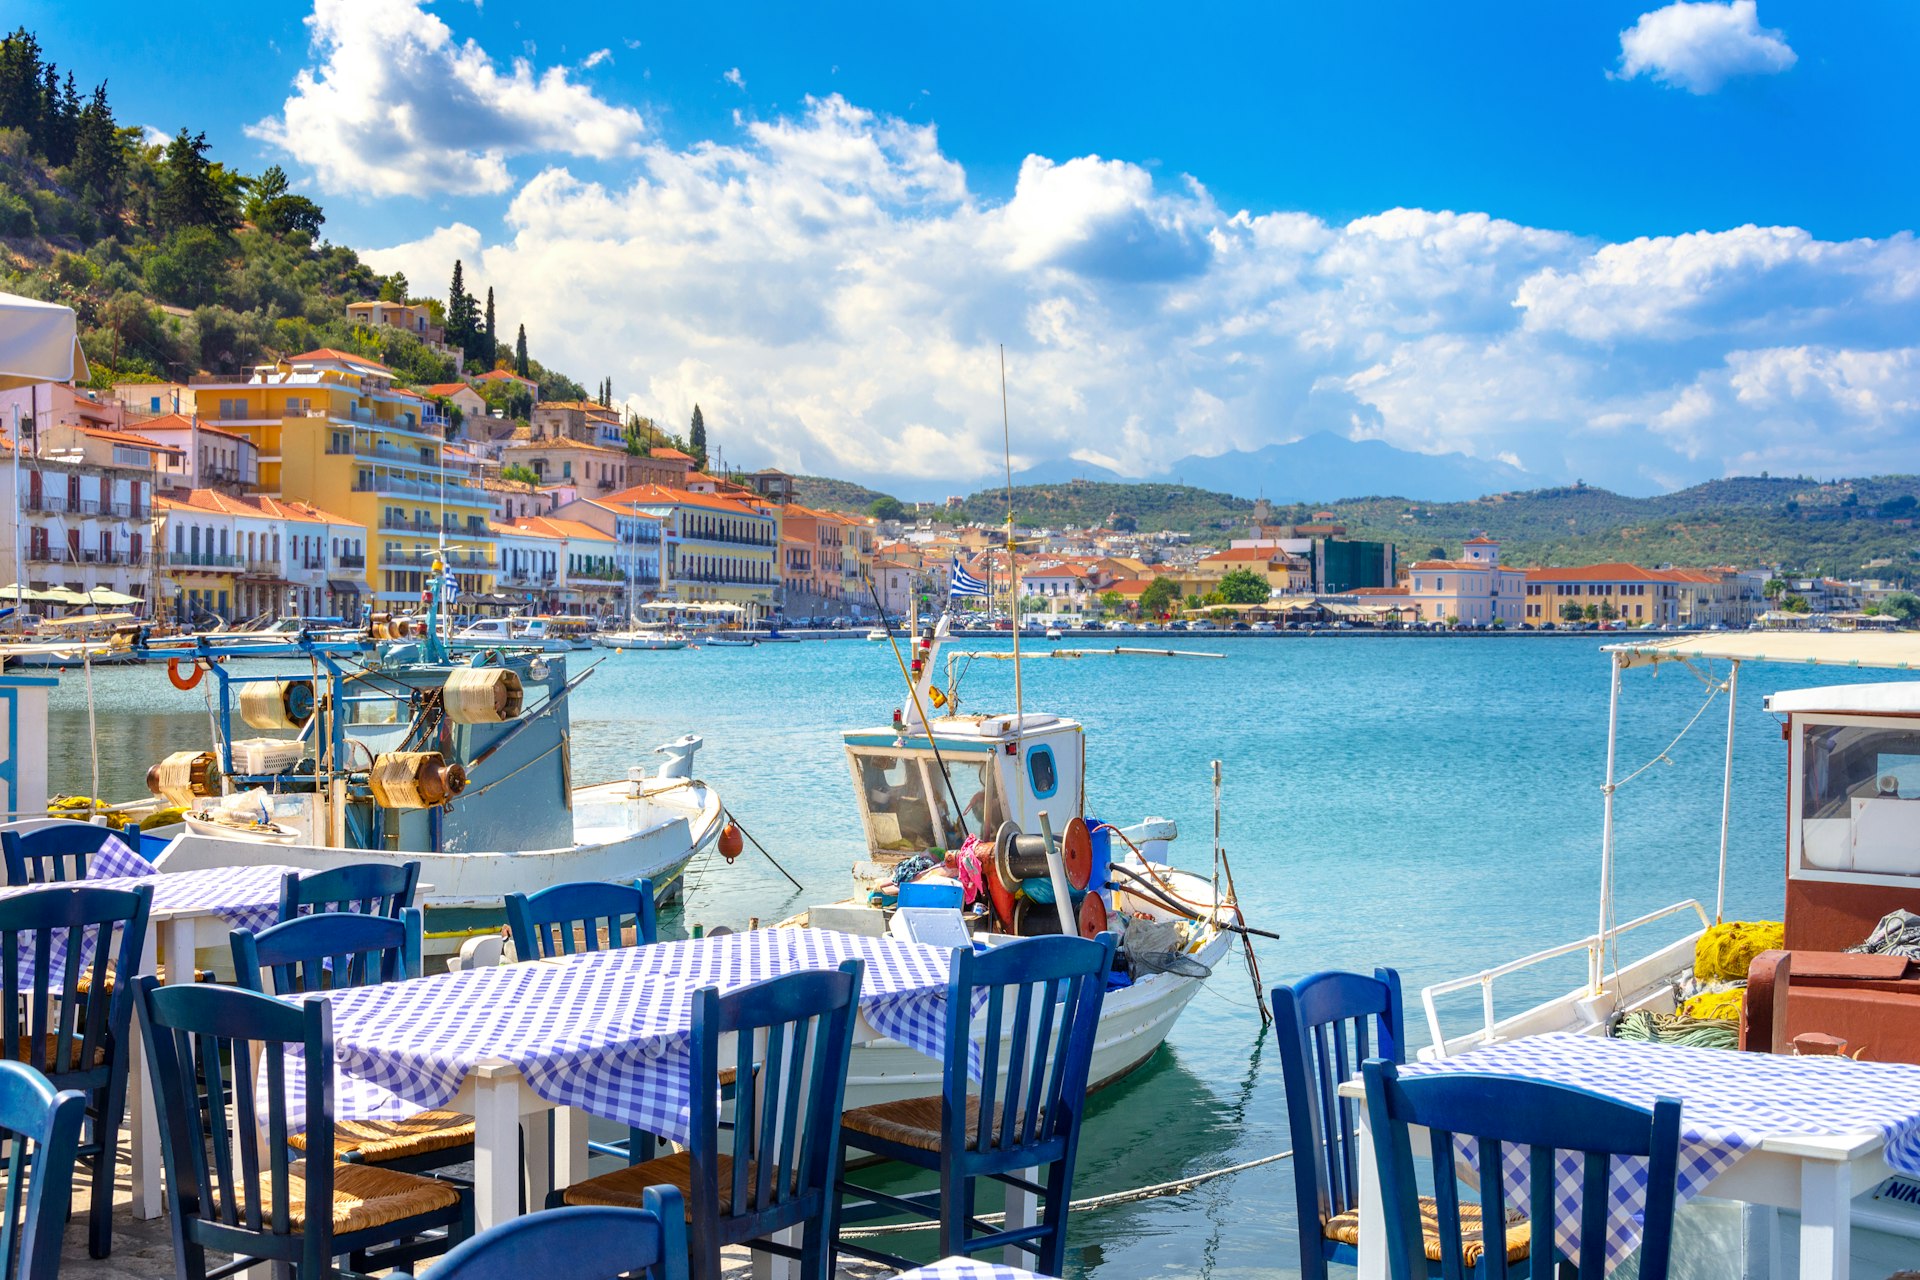 The picture-perfect coast of Gythio in Peloponnese, Greece